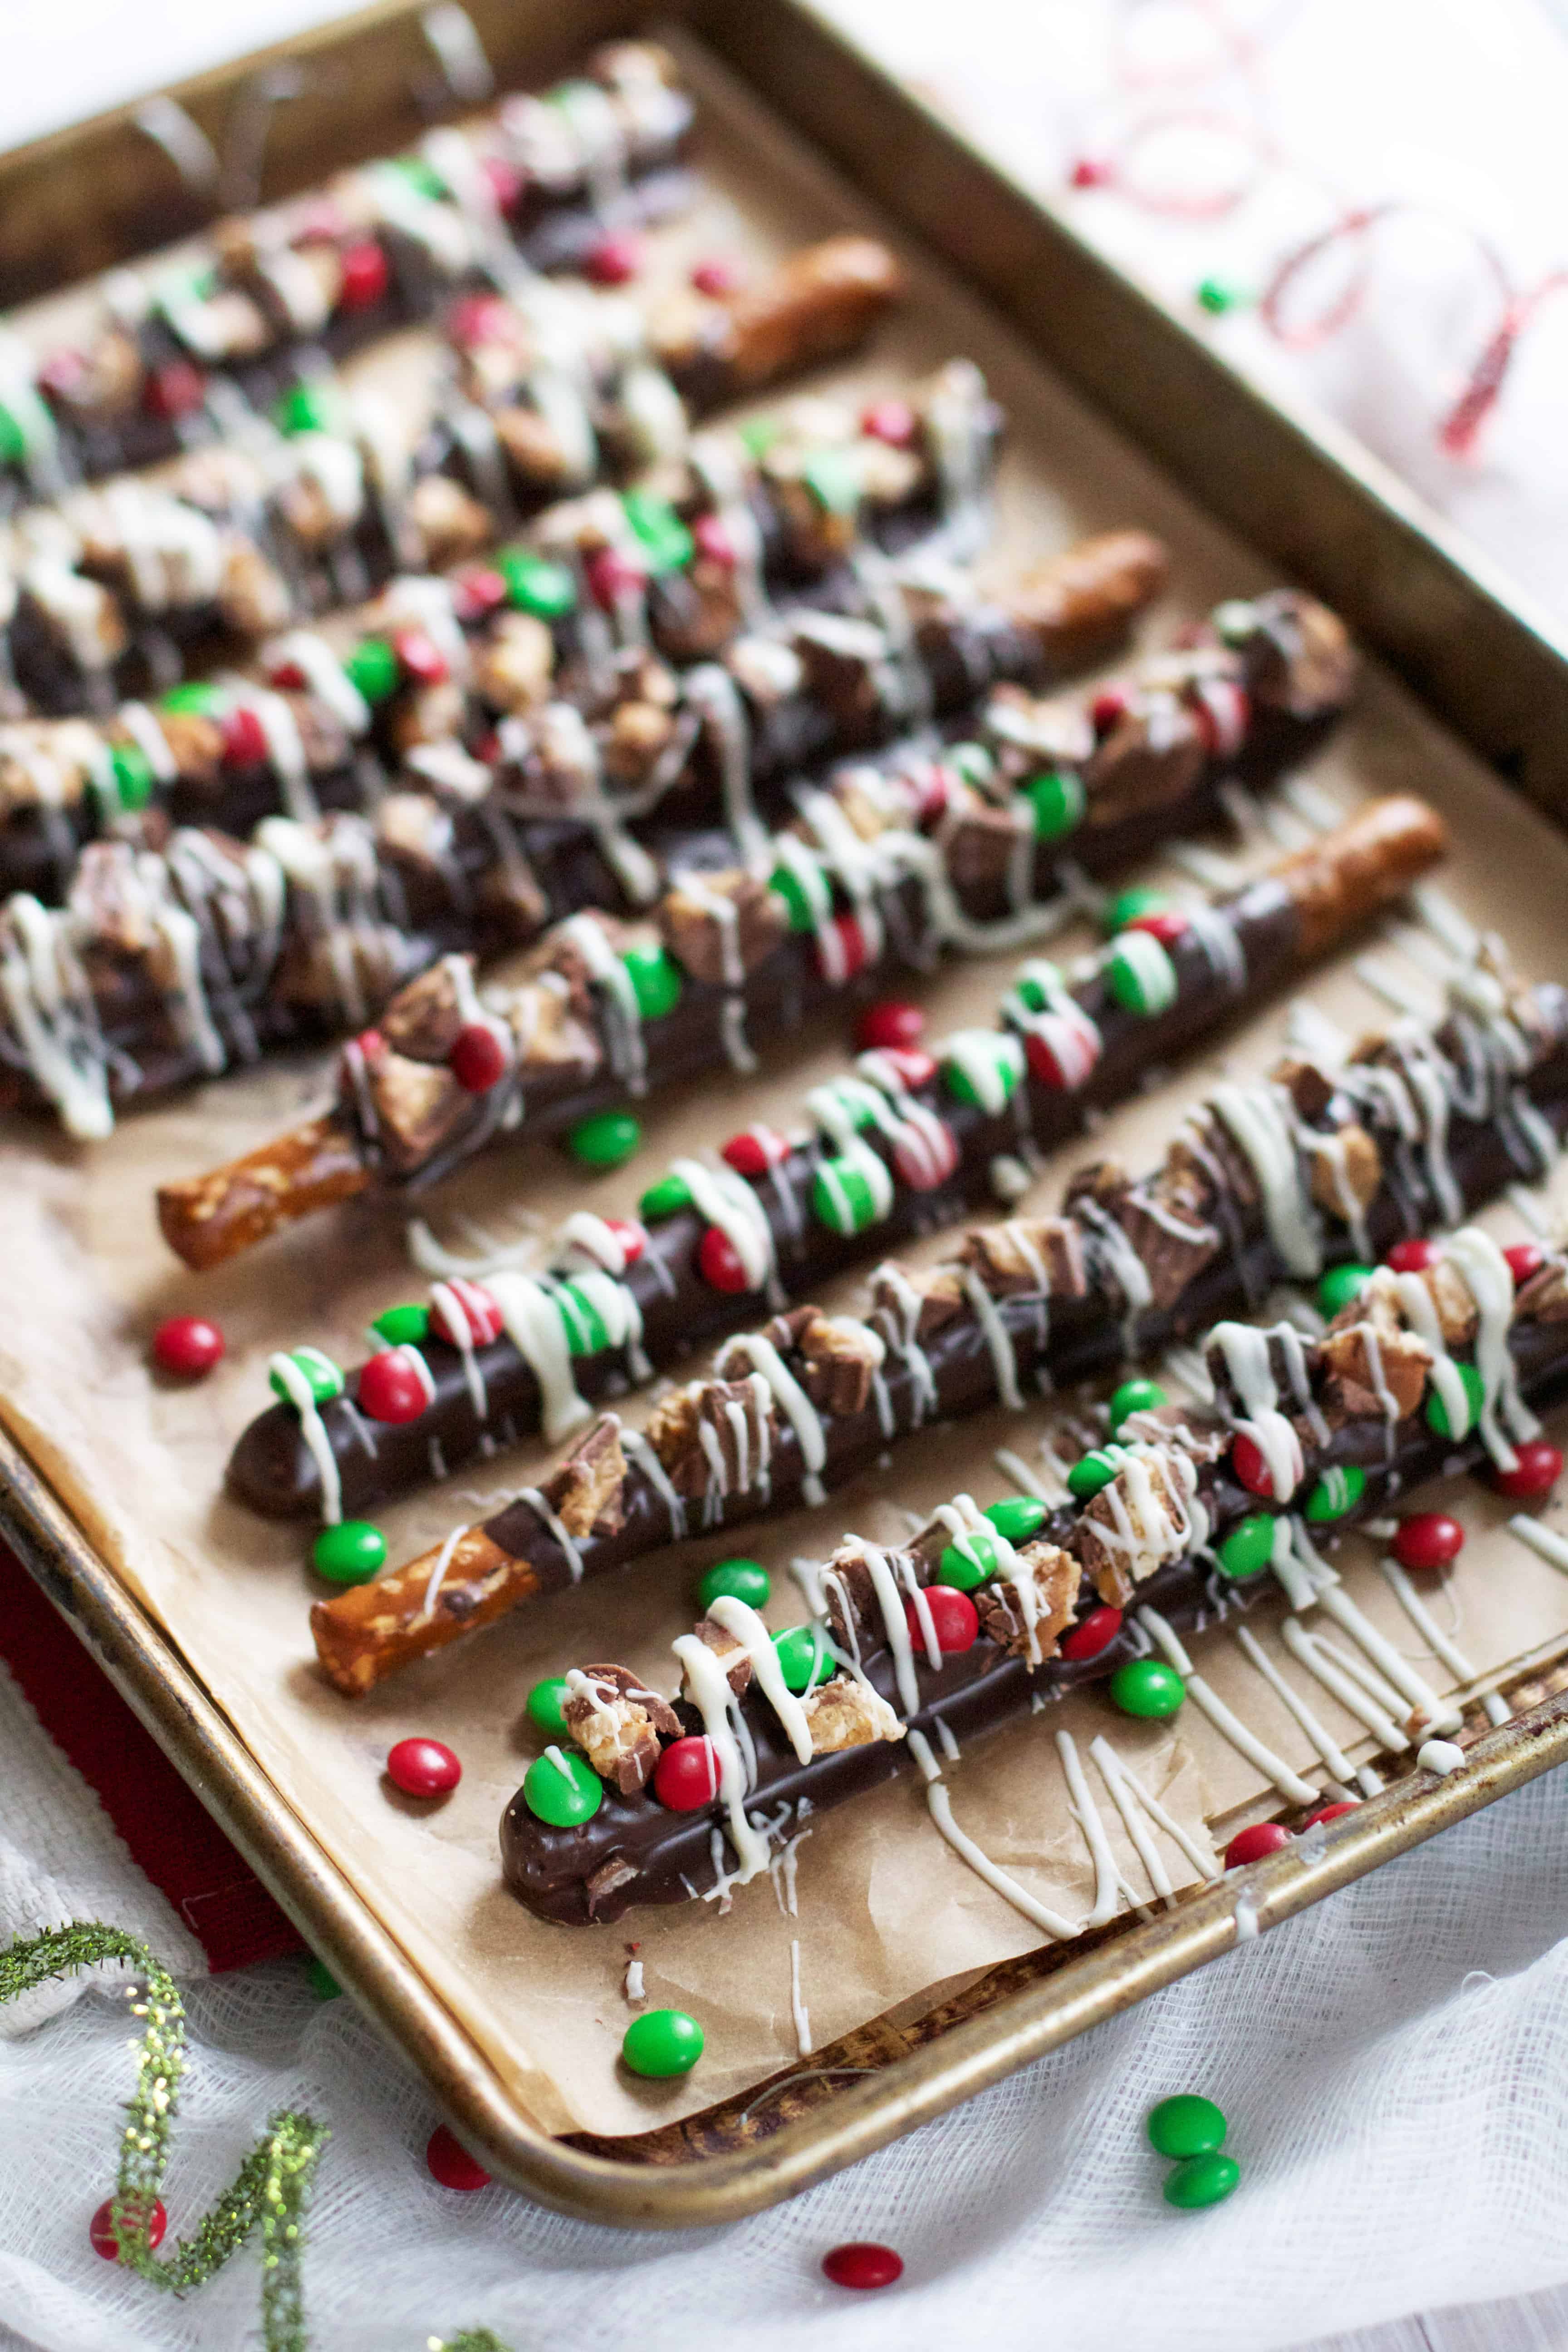 Holiday recipes with Glad and M&Ms at Target